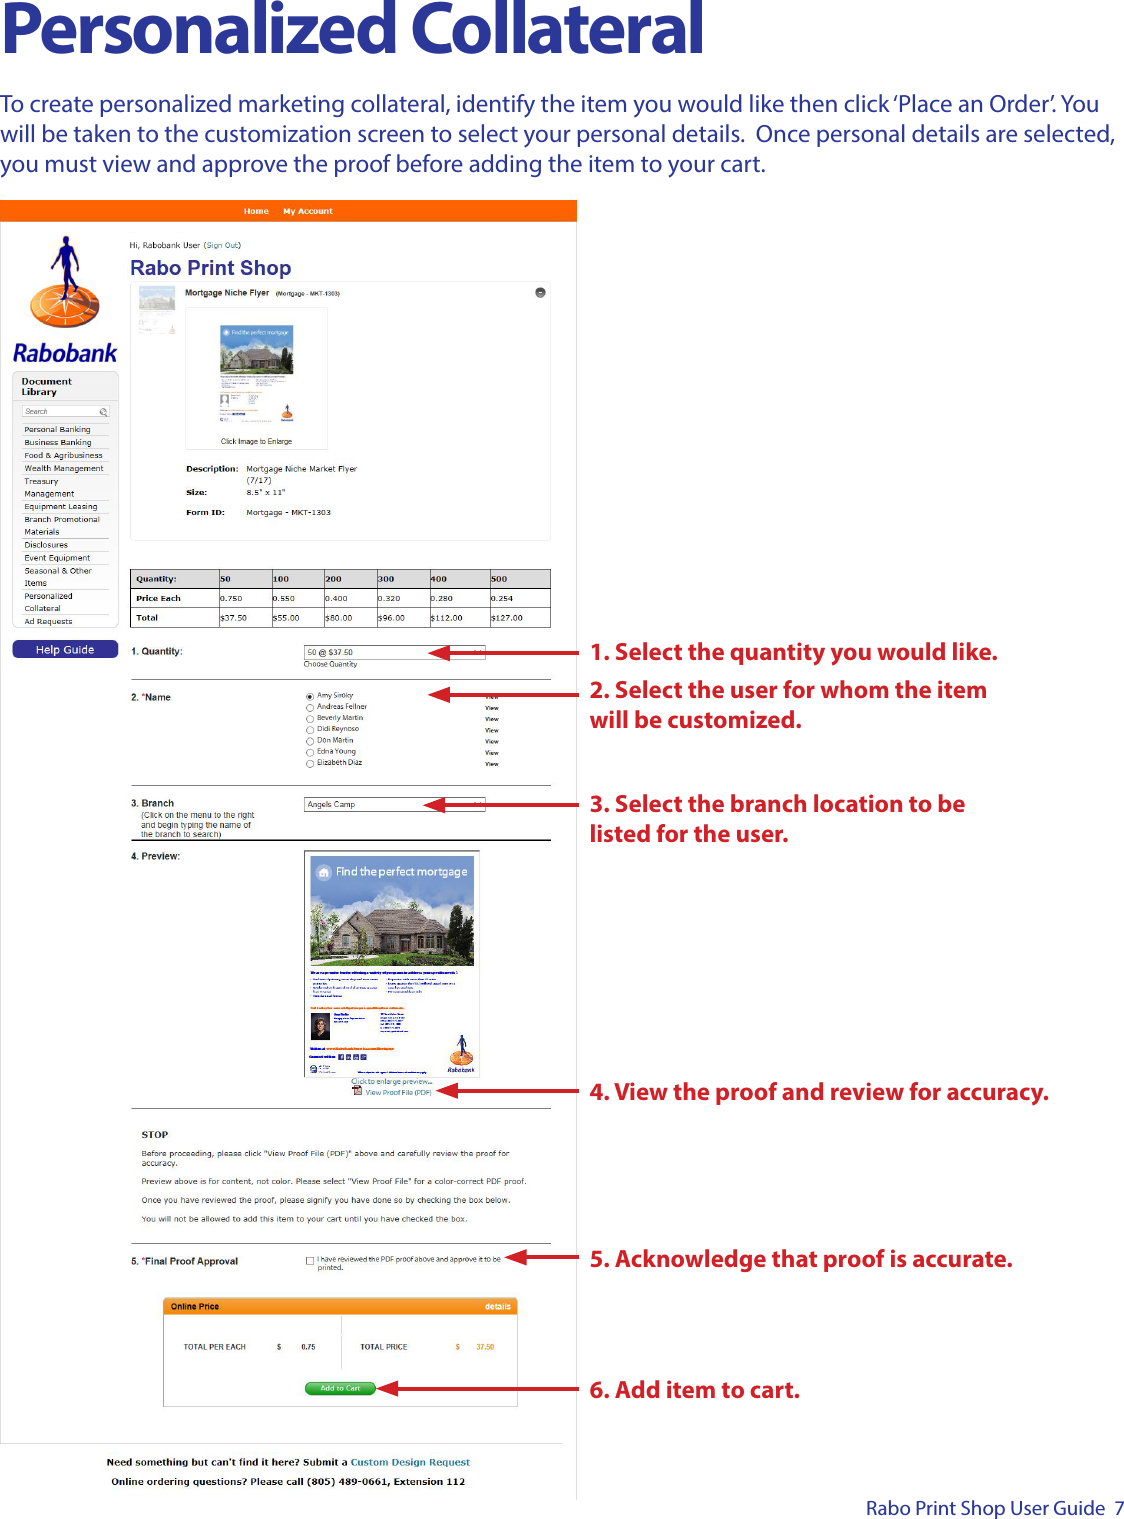 Page 7 of 10 - Rabo Print Shop User Guide